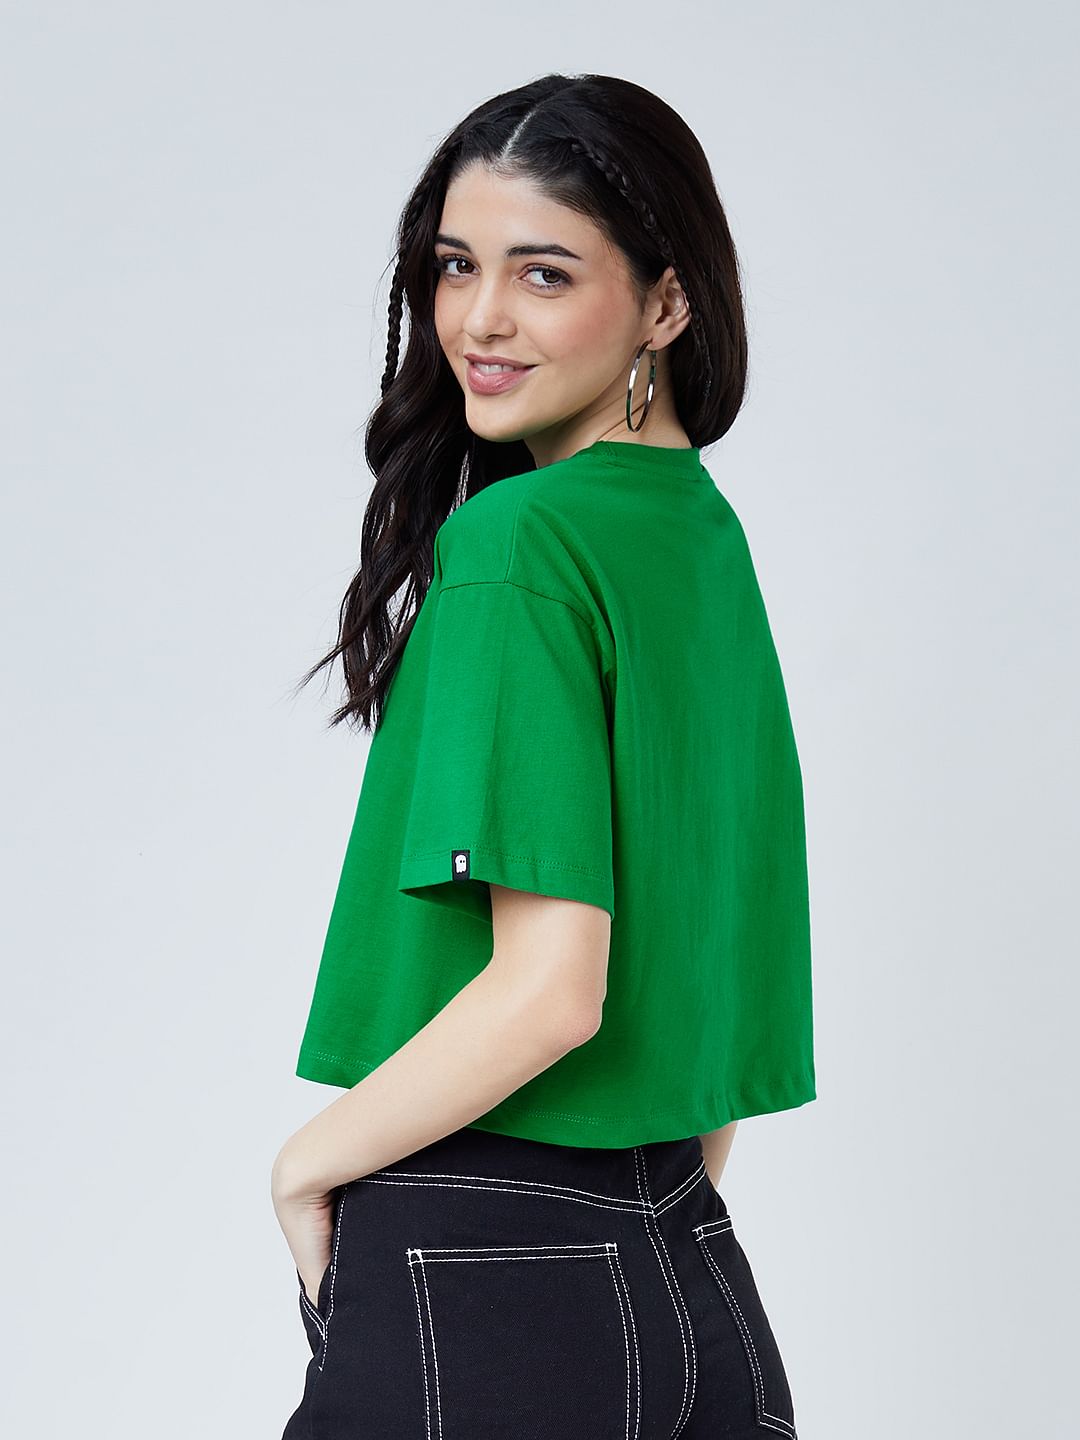 Solids: Green (Oversized)